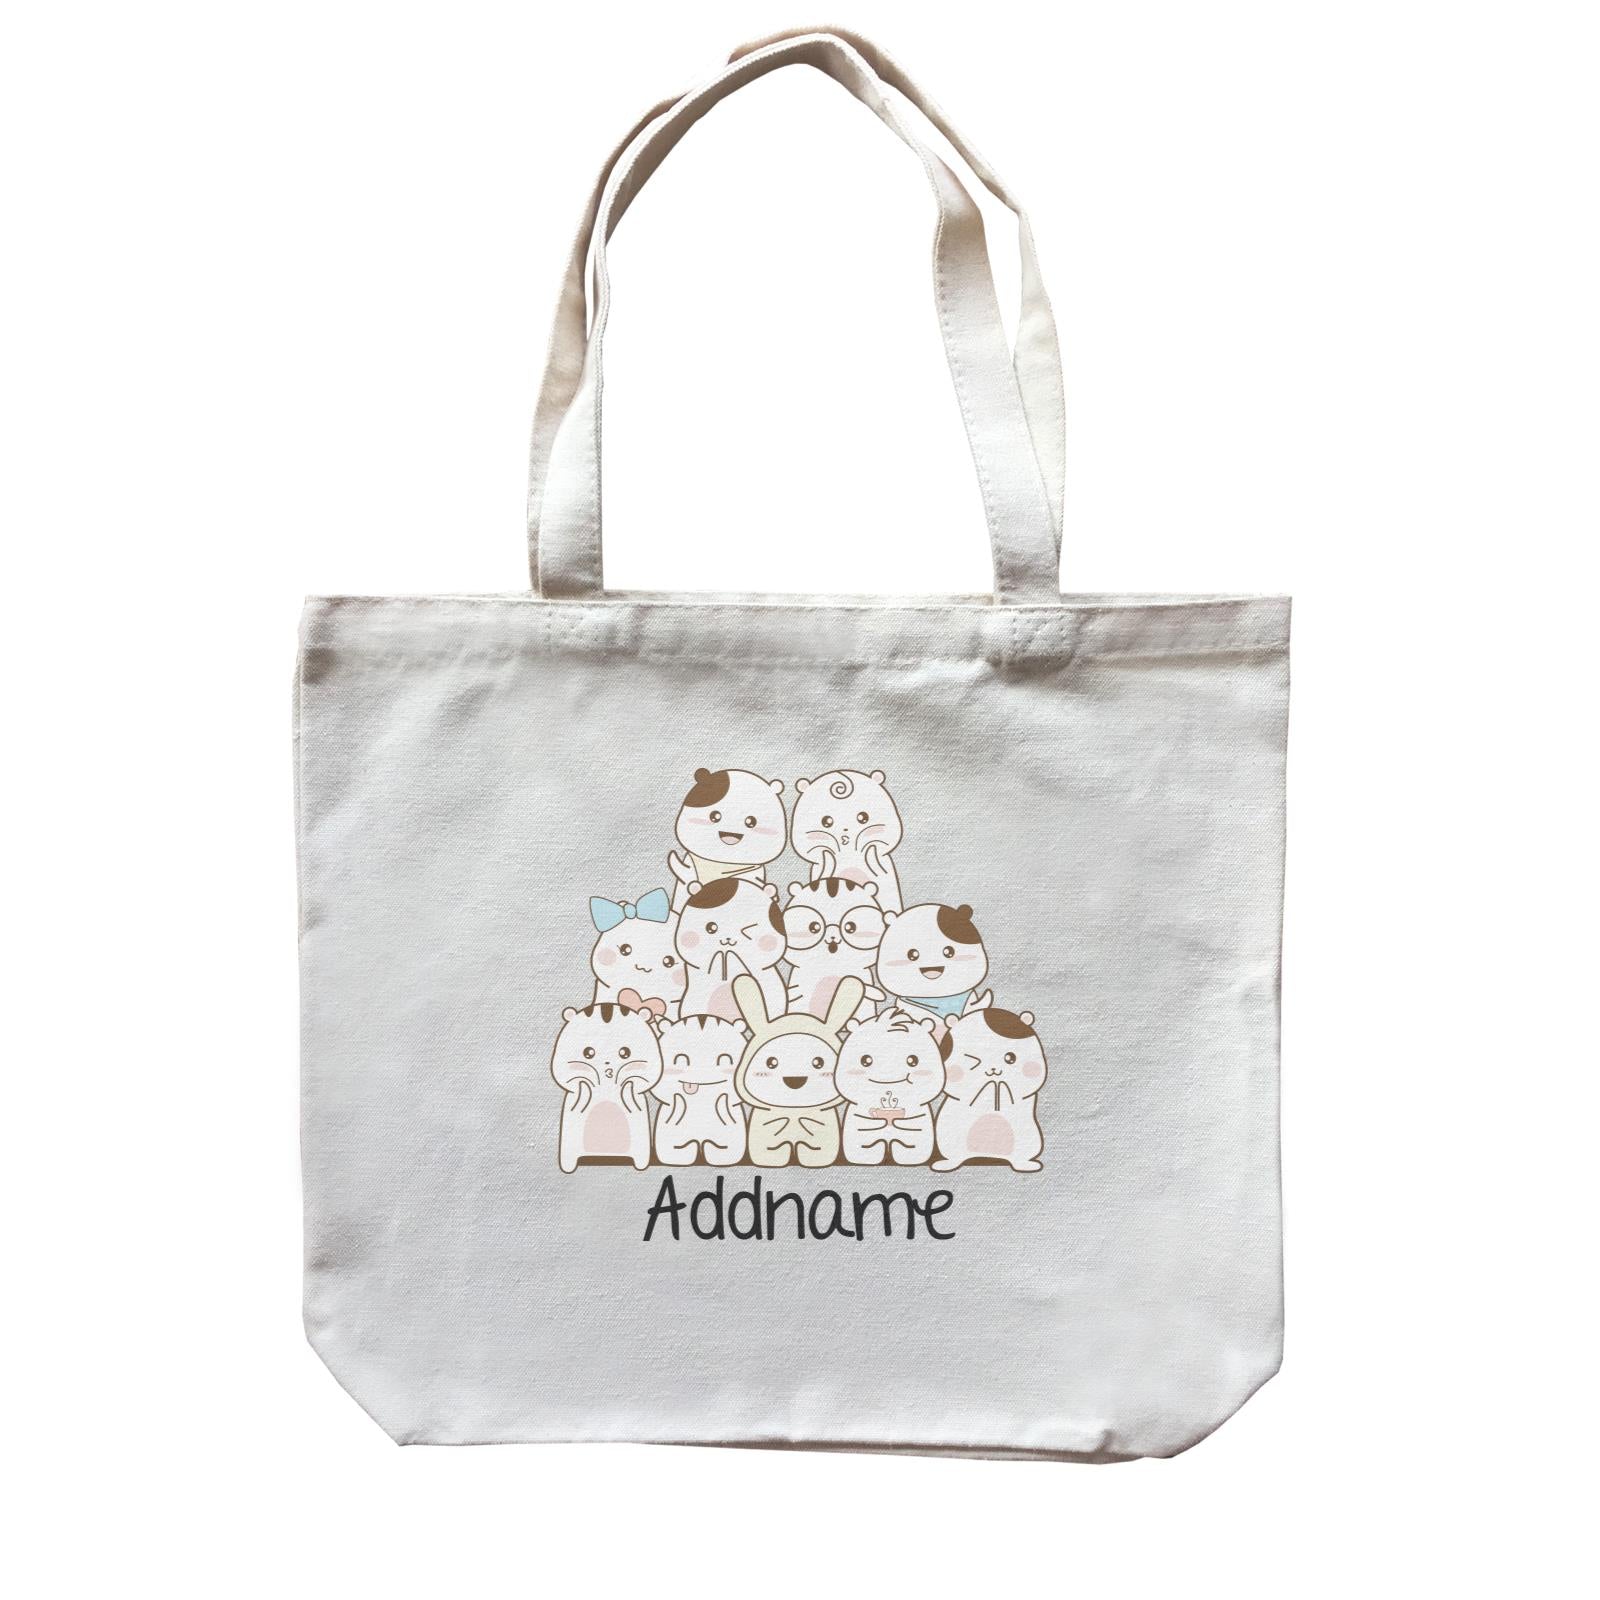 Cute Animals And Friends Series Cute Hamster Group Addname Canvas Bag